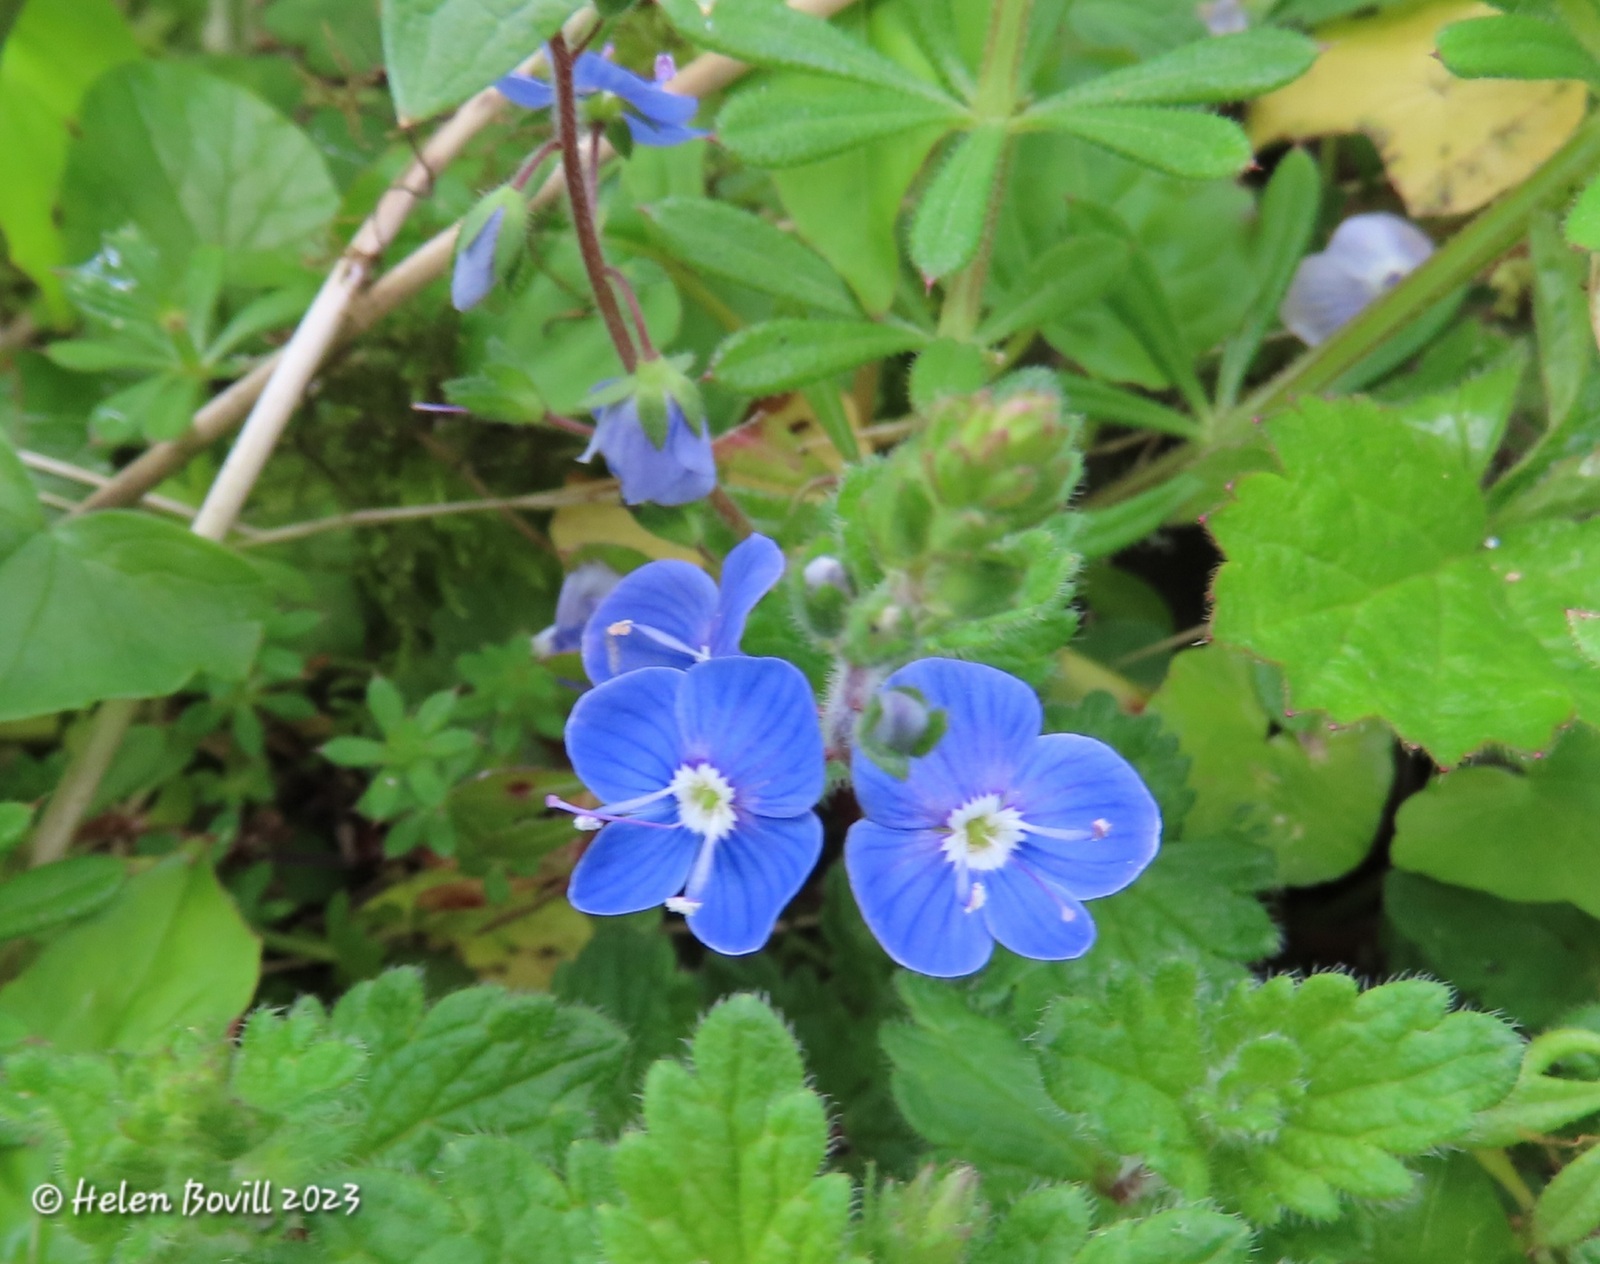 The mall blue flowers of Germander Speedwell